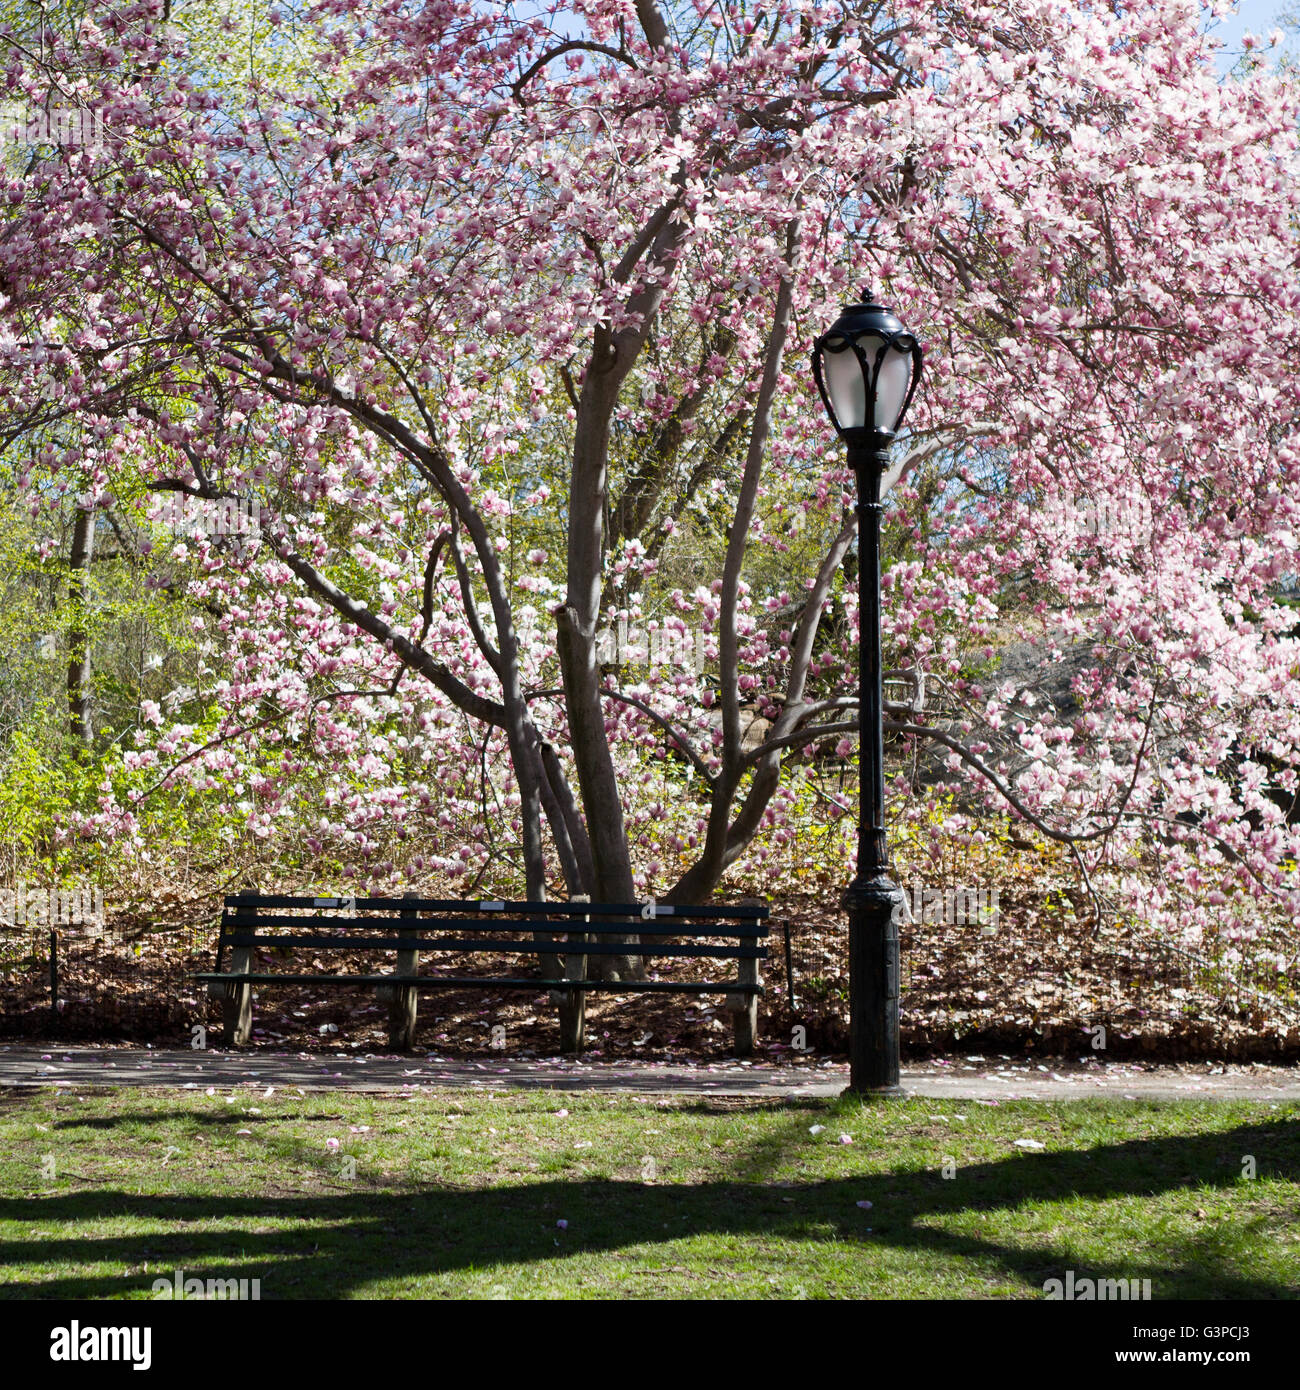 Central Park bench and light post framed by large flowering magnolia tree Stock Photo